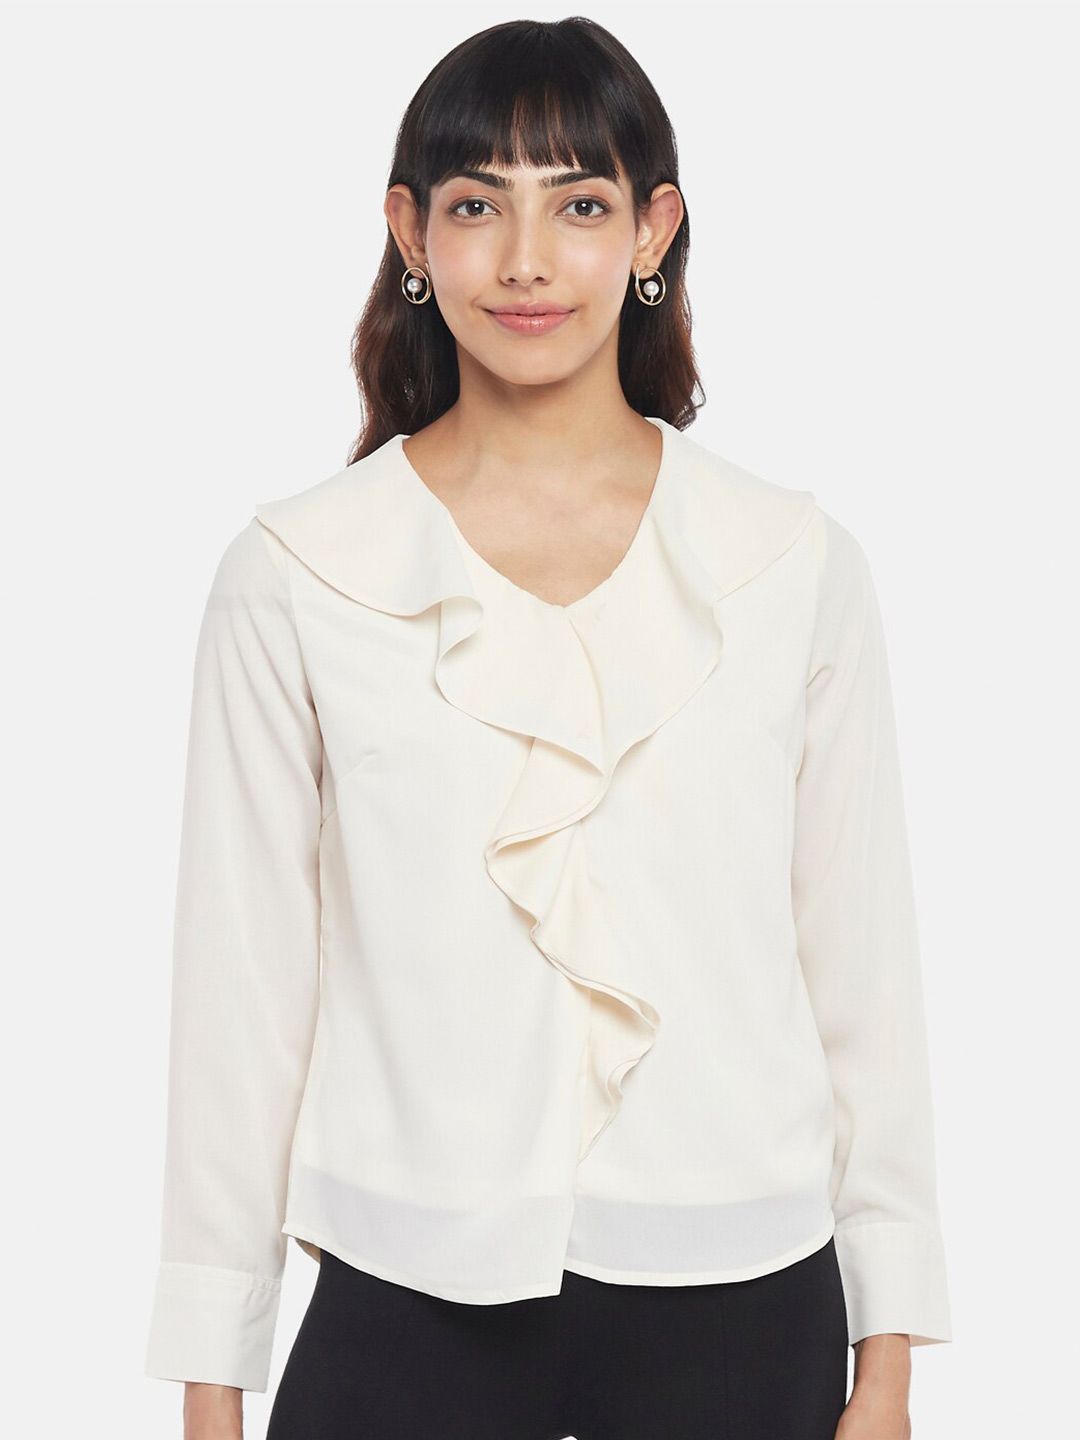 Annabelle by Pantaloons Off White Ruffles Top Price in India